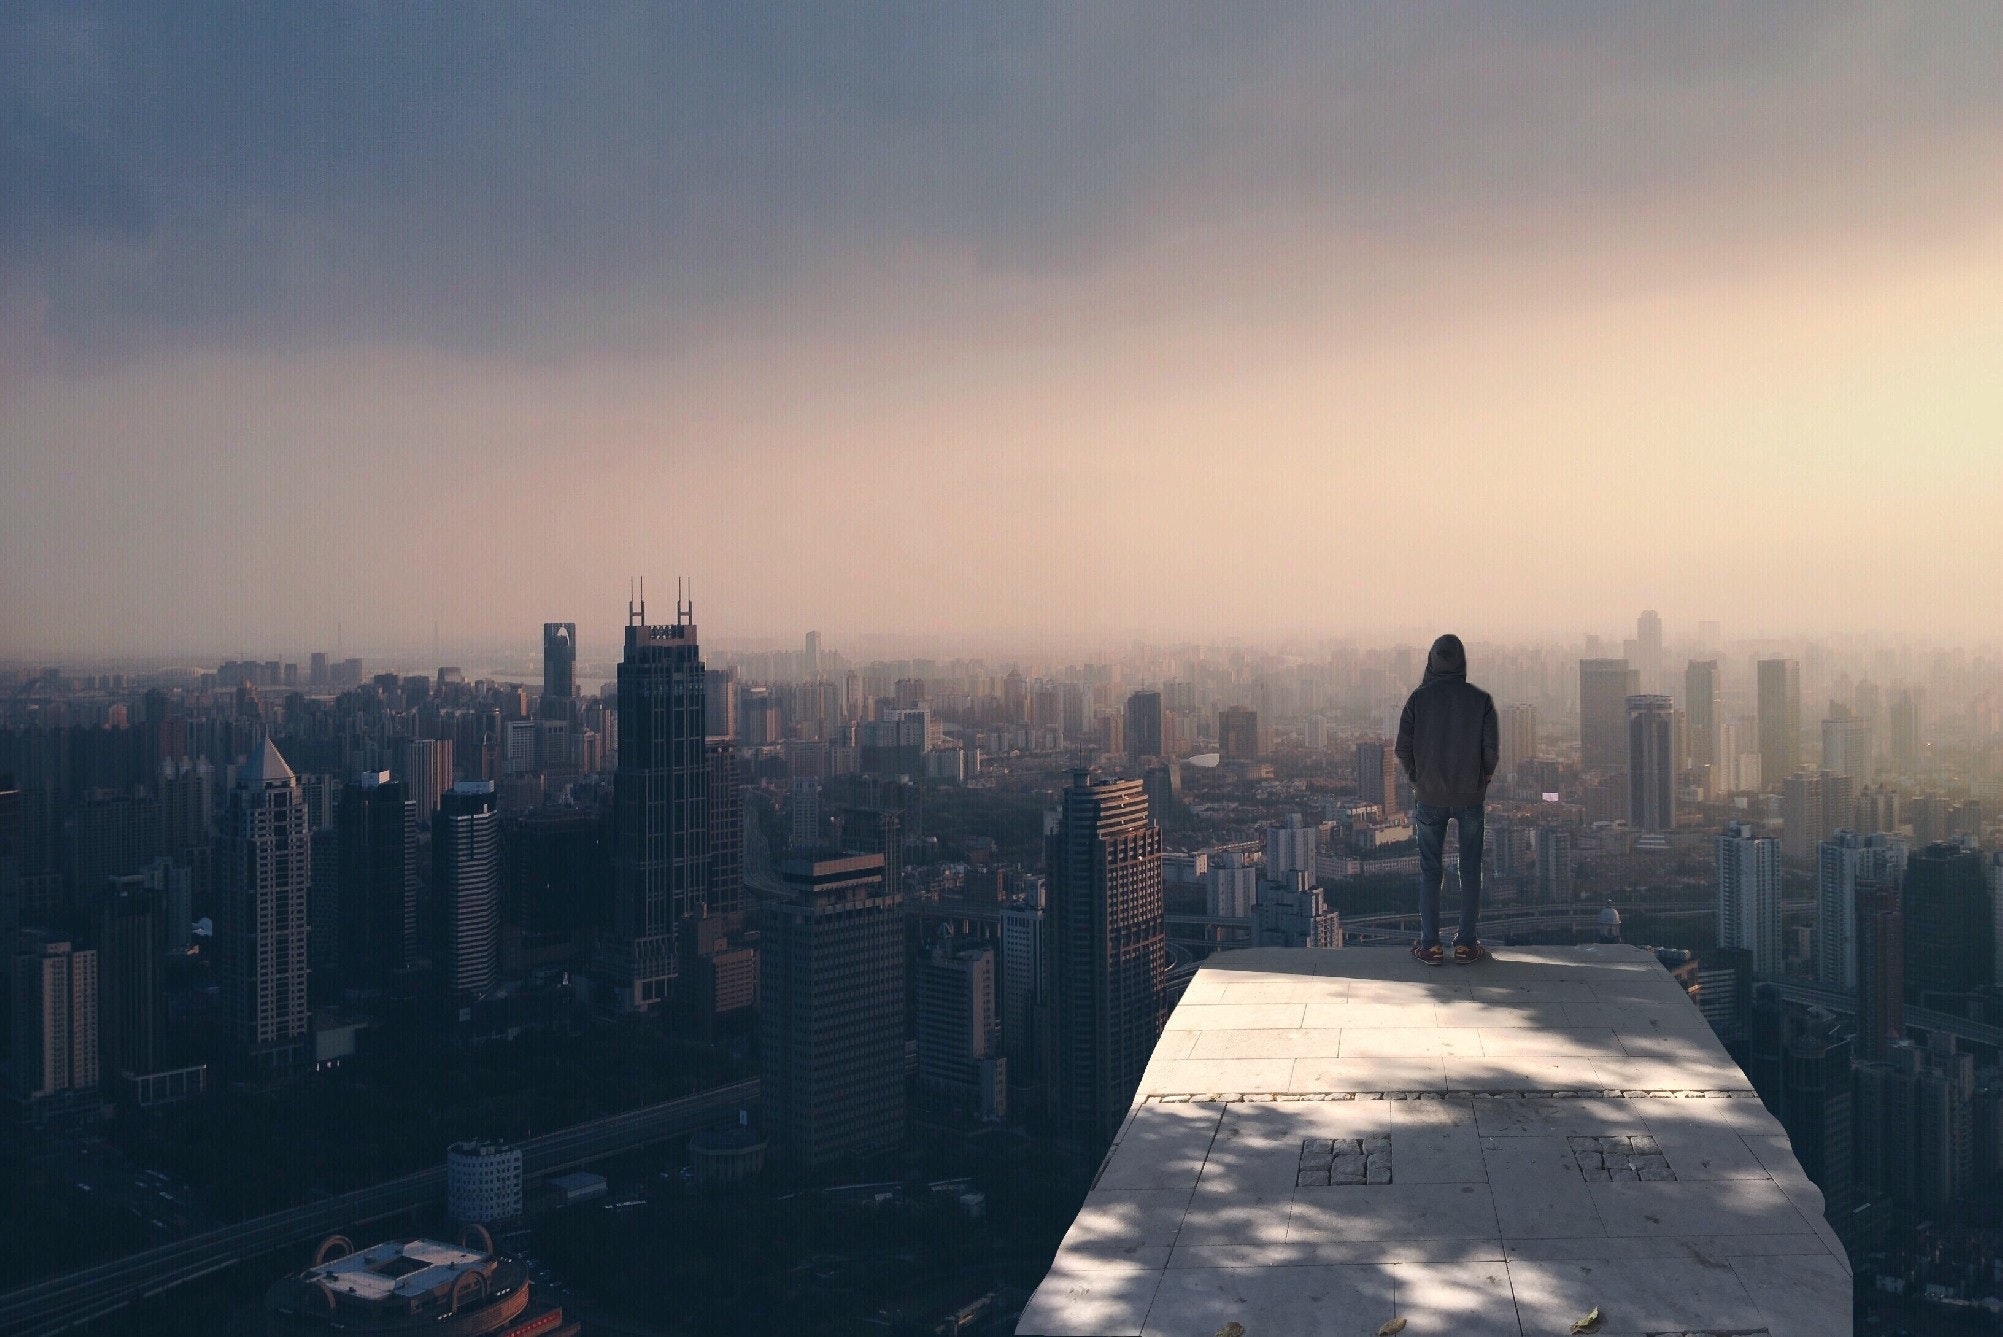 Silhouette of a person standing on a cliff overlooking a crowded city skyline.